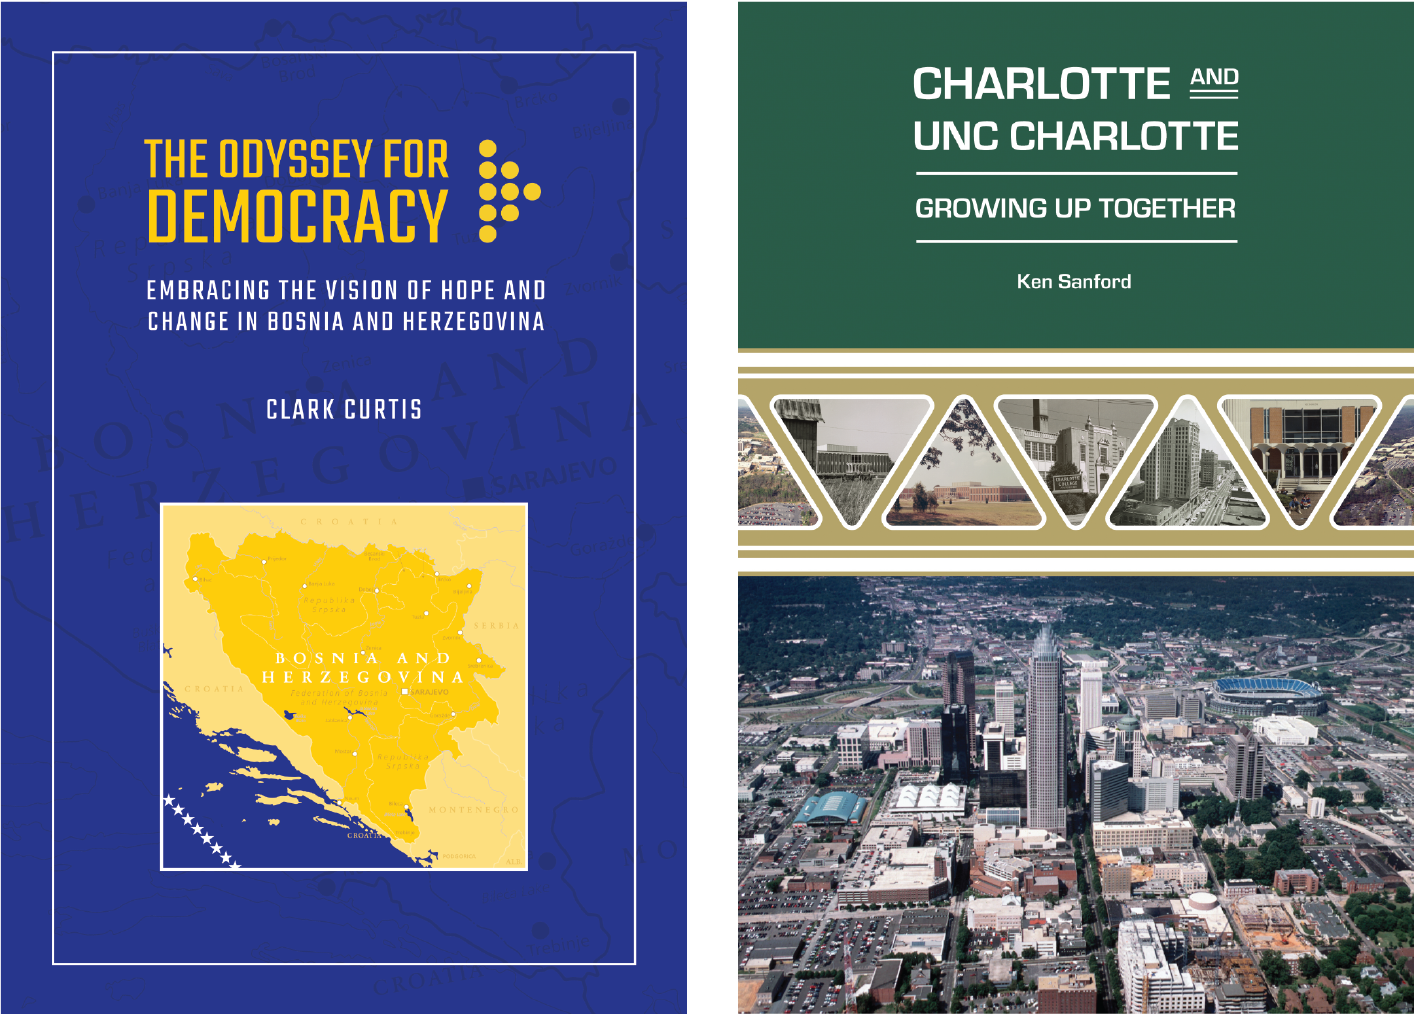 Book covers for The Odyssey for Democracy and Charlotte and UNC Charlotte: Growing Up Together